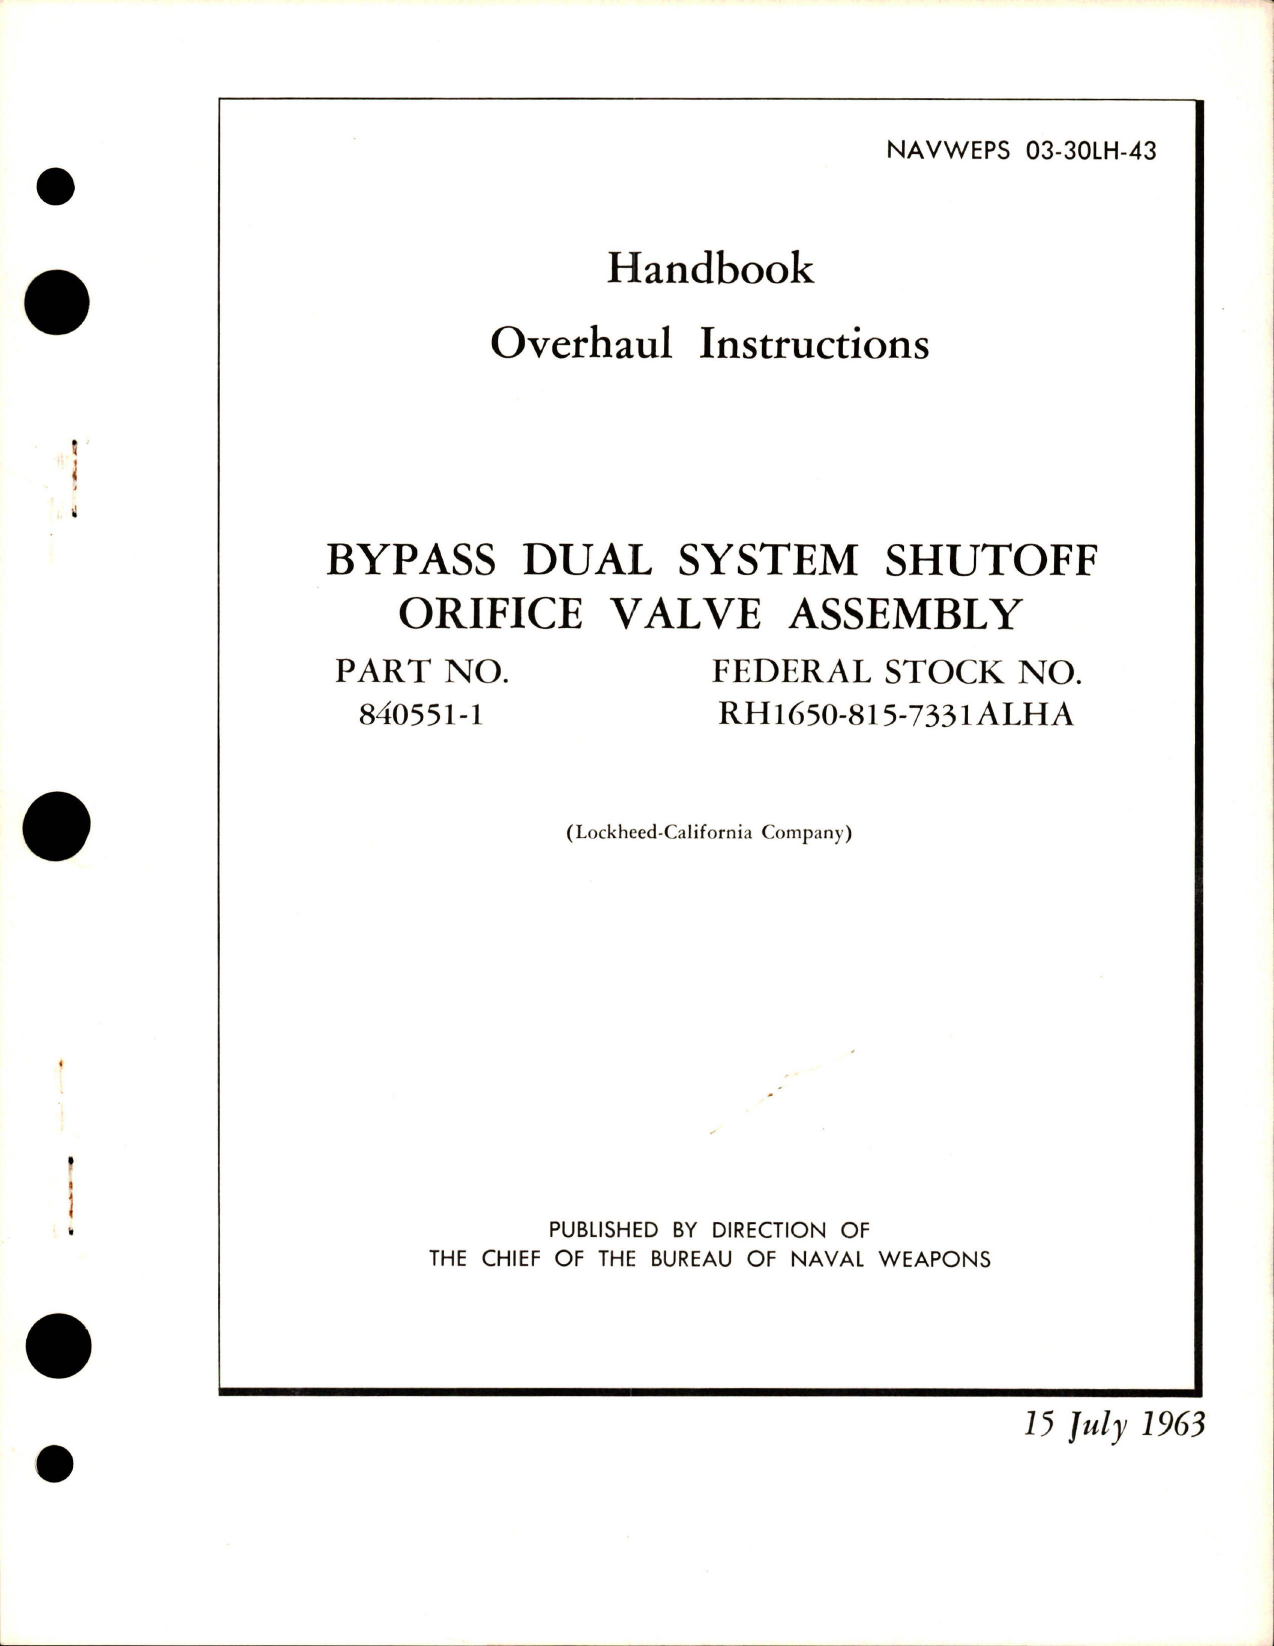 Sample page 1 from AirCorps Library document: Overhaul Instructions for Bypass Dual System Shutoff Orifice Valve Assembly - Part 840551-1